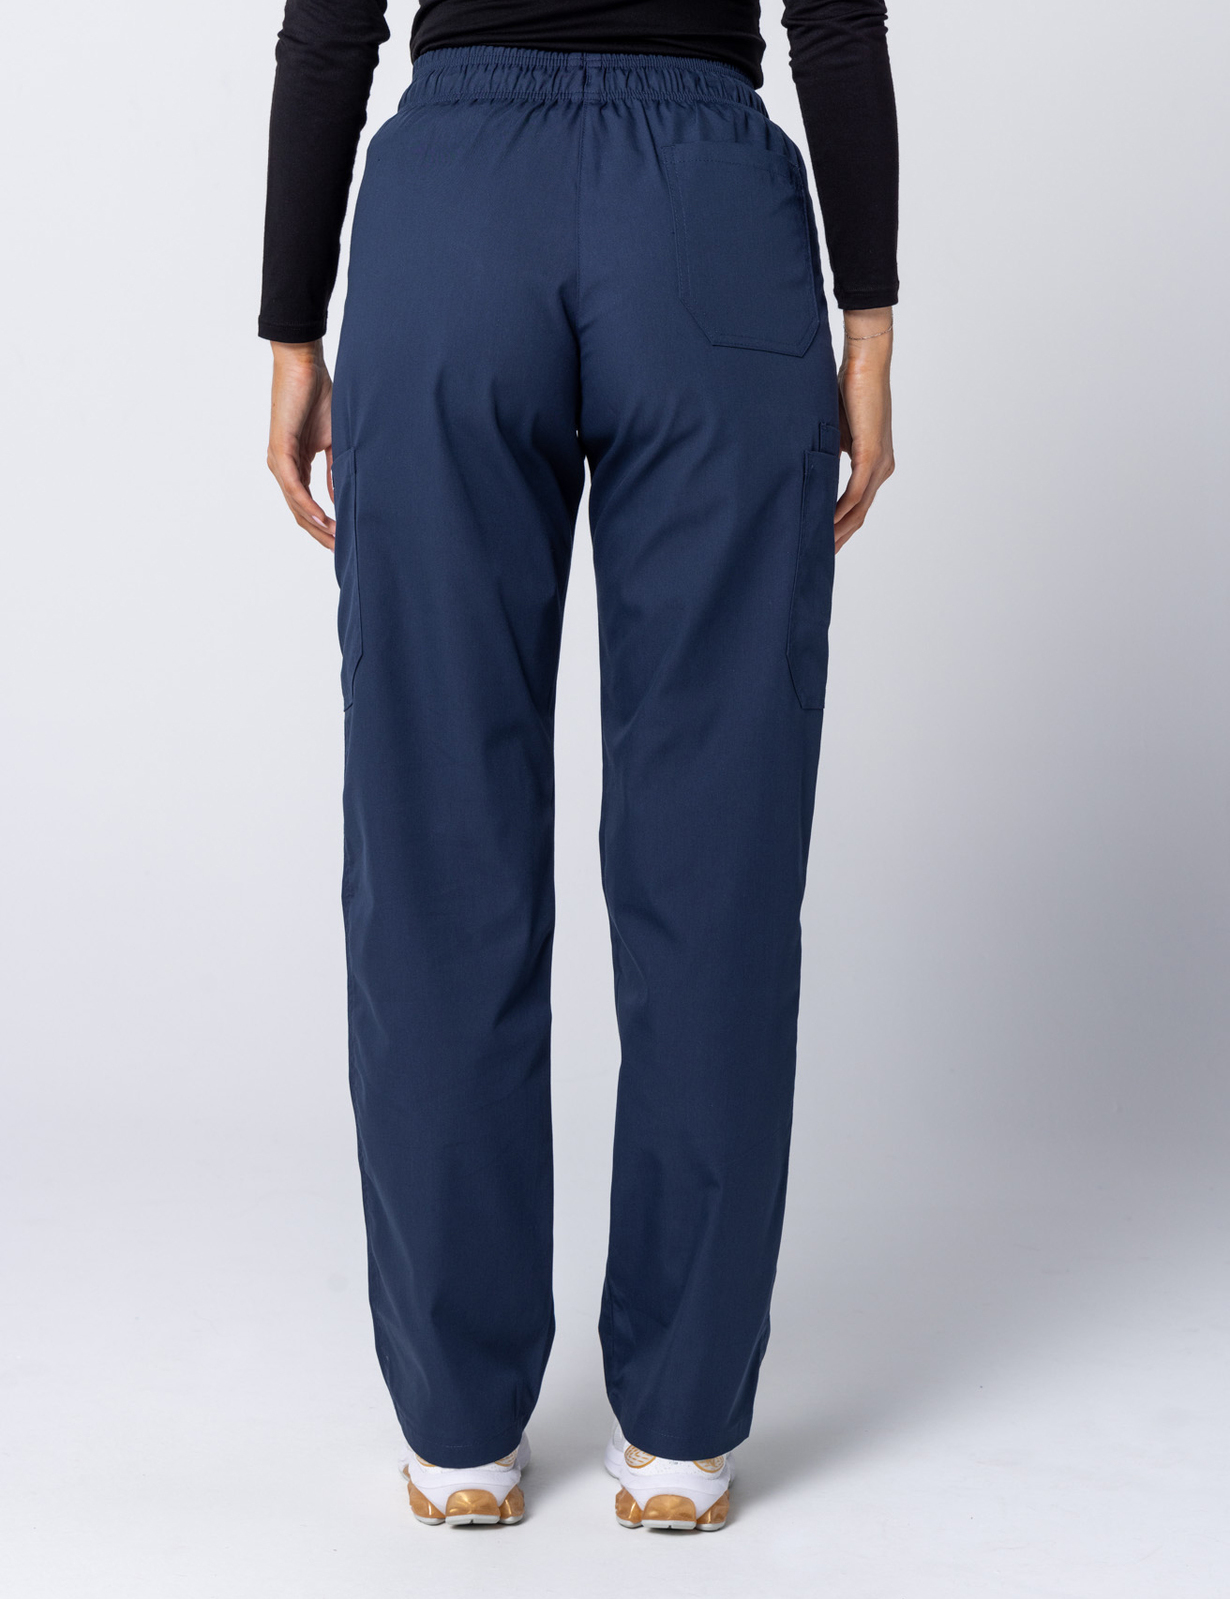 Unisex Lightweight Scrub Trousers, Healthcare Trousers